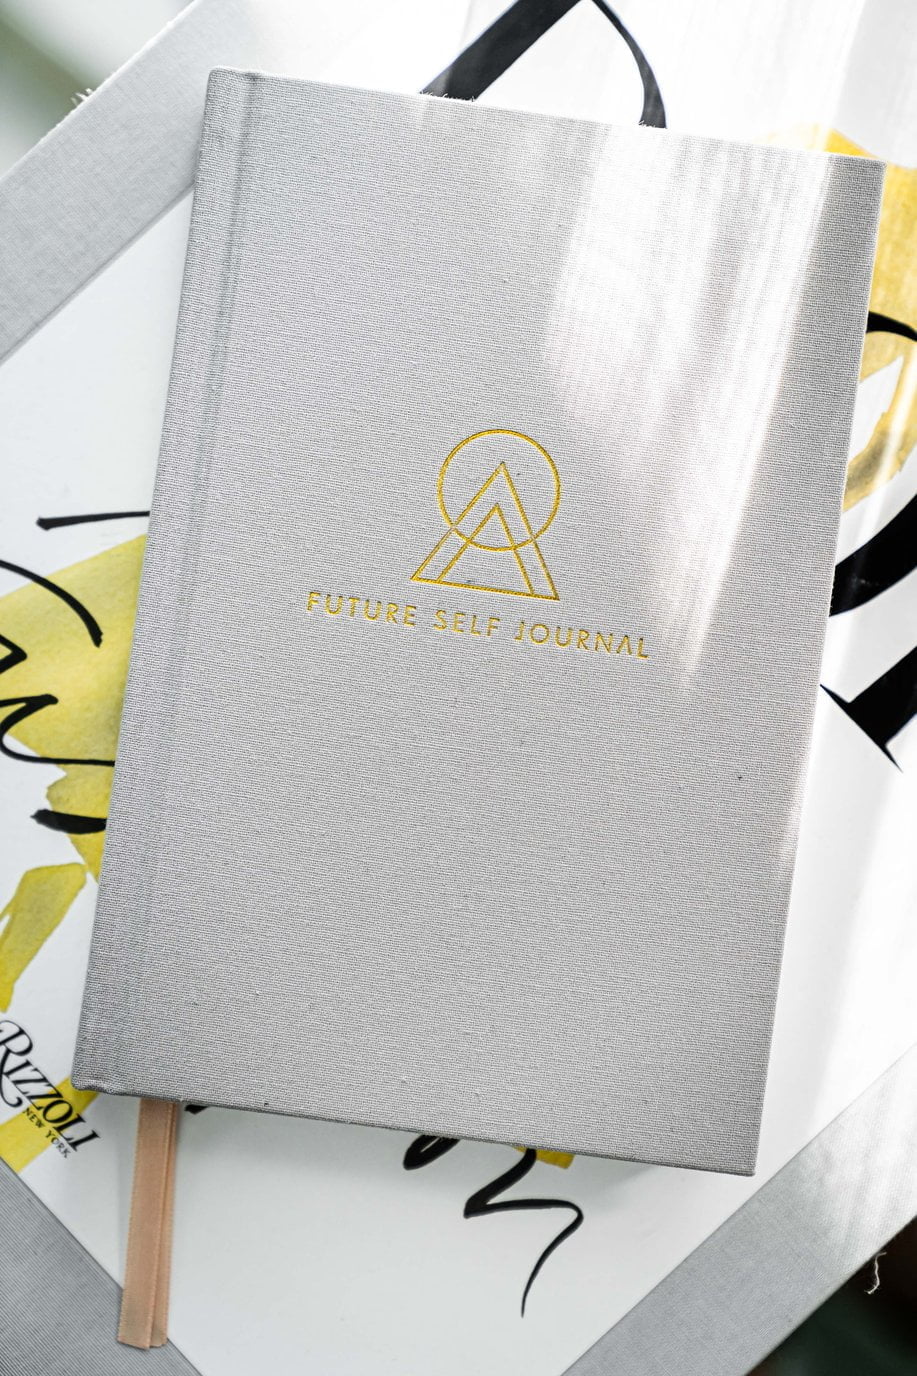 10% Off With Future Self Journal Promo Code